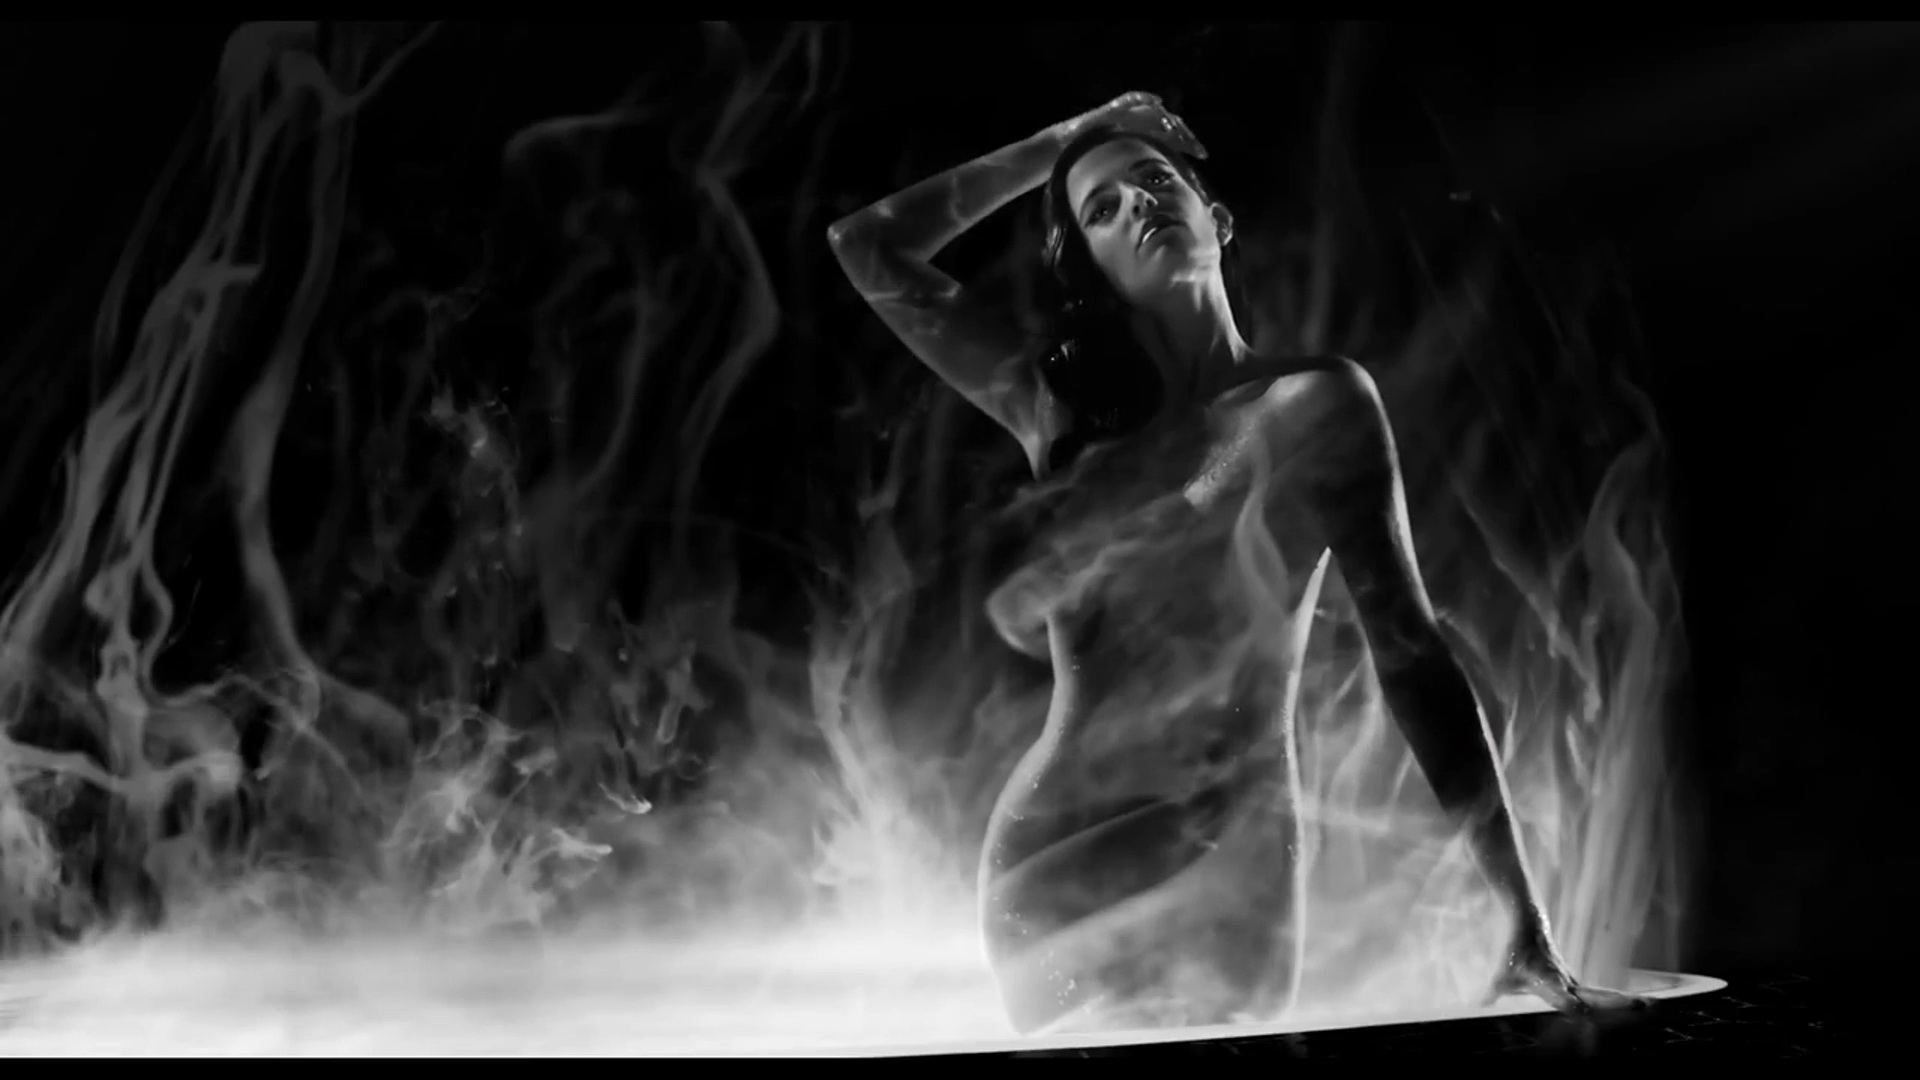 diane childress recommends Sin City Nude Scenes